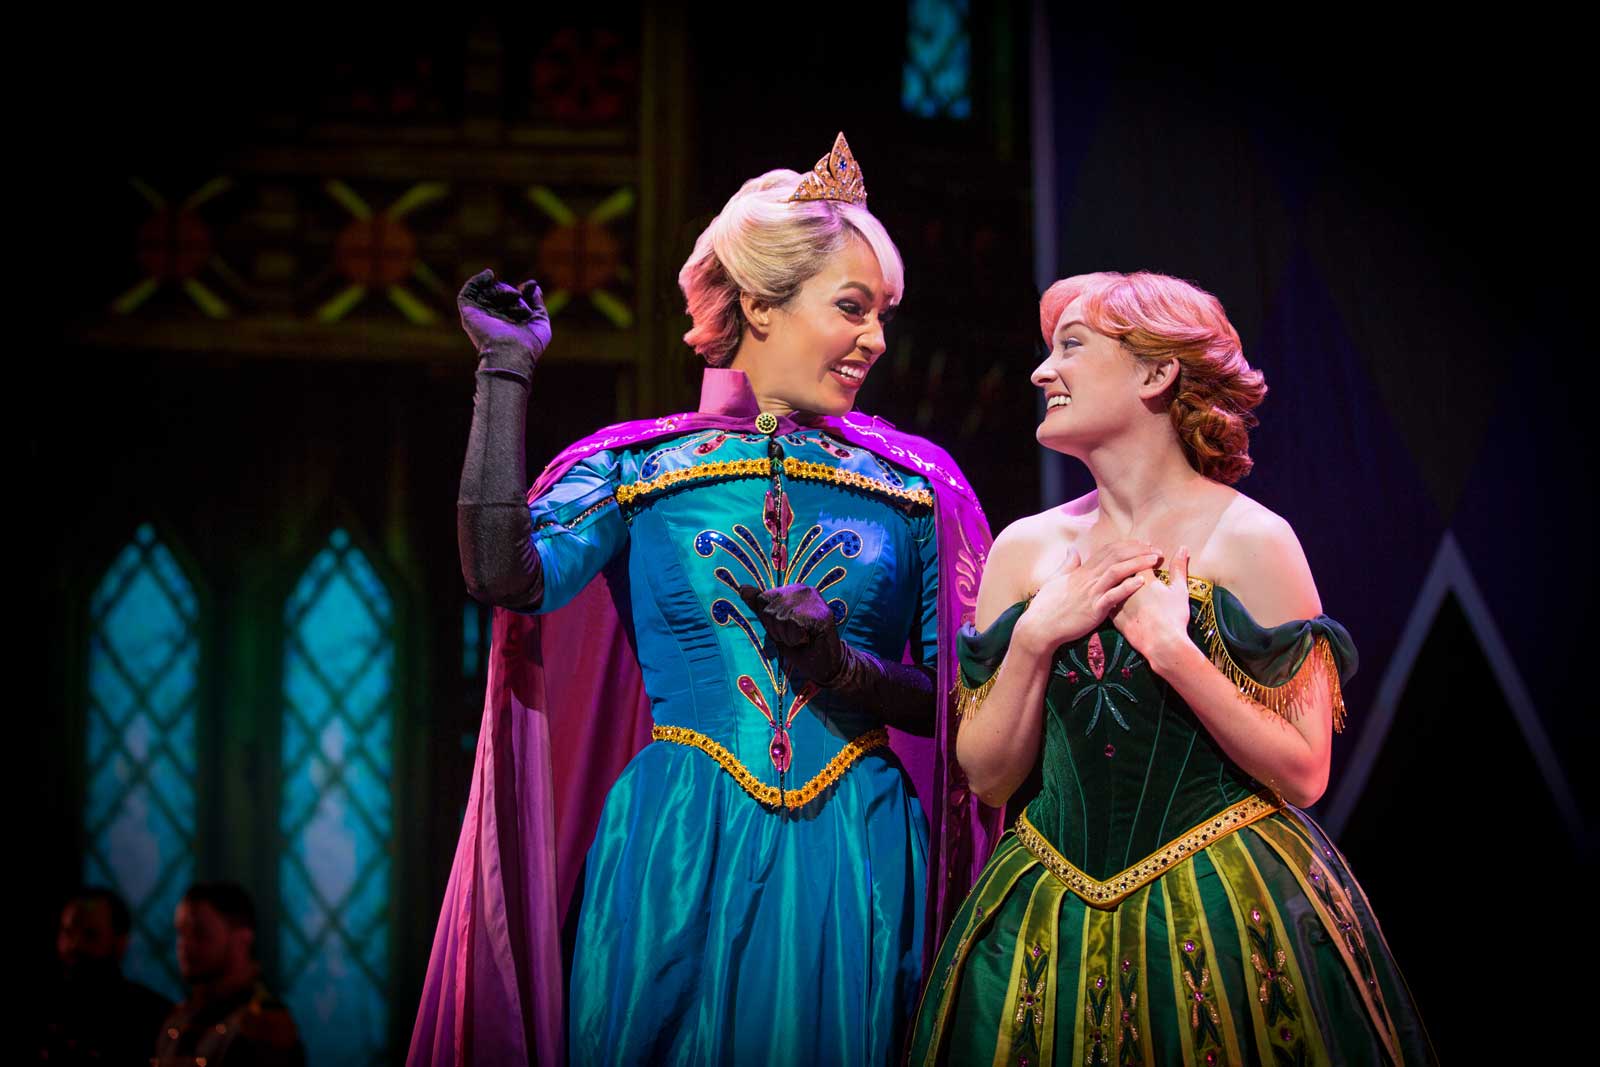 ANNA AND ELSA IN 'FROZEN - LIVE AT THE HYPERION' -- A new theatrical interpretation for the stage based on Disney's animated blockbuster film, Frozen is now playing at the Hyperion Theater at Disney California Adventure Park. The show immerses audiences in the emotional journey of Anna and Elsa with all of the excitement of live theater, including elaborate costumes and sets, stunning special effects and show-stopping production numbers.(Piotr A. Redlinski/Disneyland Resort)